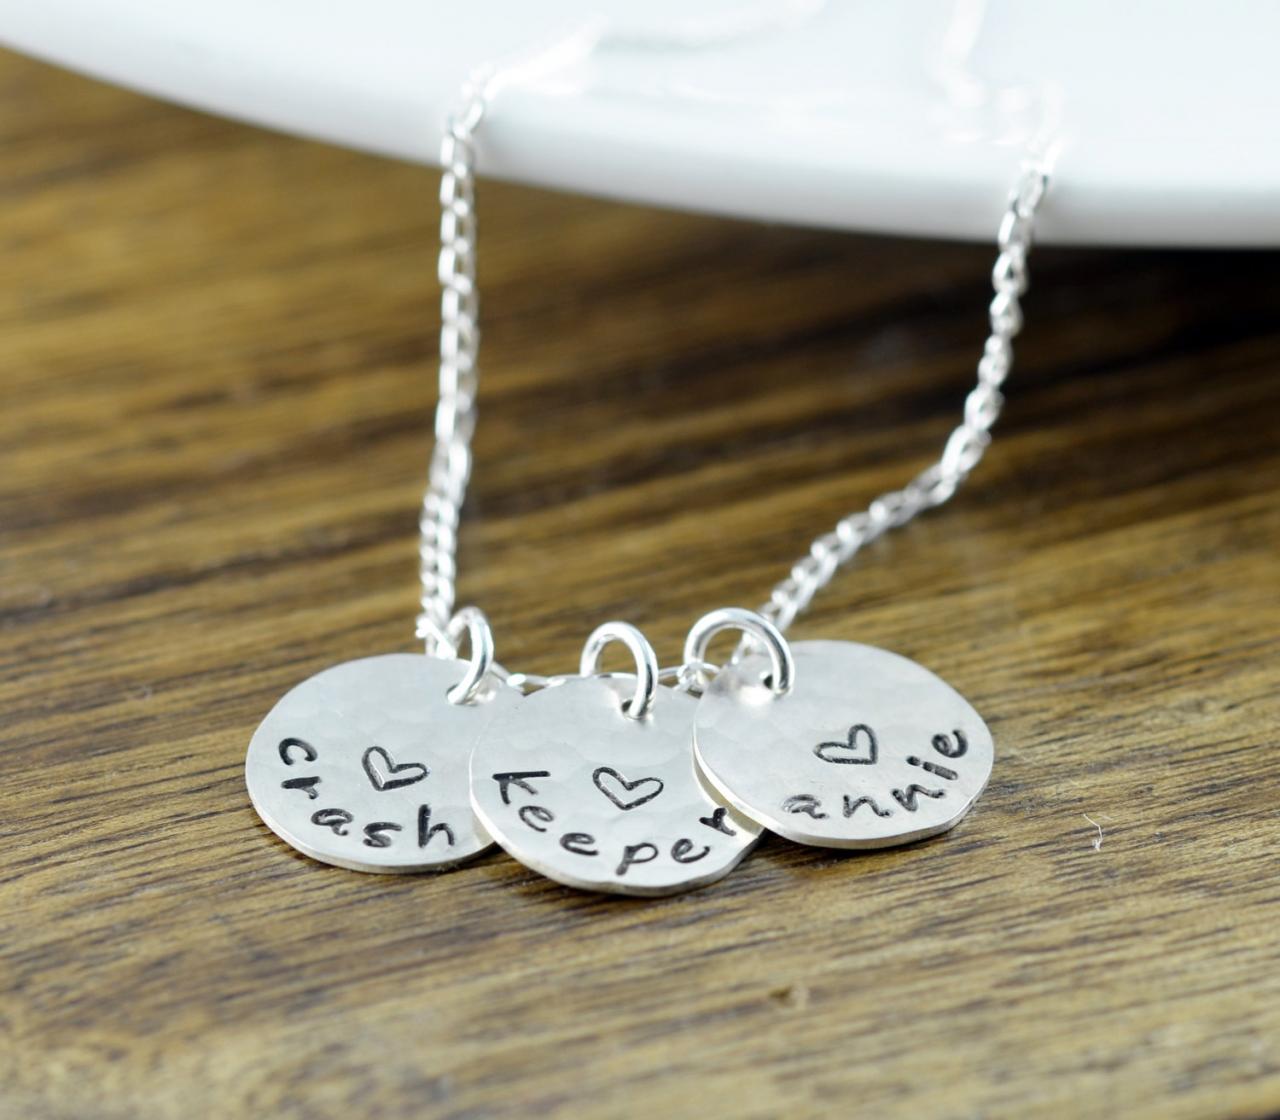 Personalized Silver Necklace, Mother's Necklace, Mom Jewelry, Kids Name Necklace, Custom Stamped Necklace, Gifts For Mom, Personalized